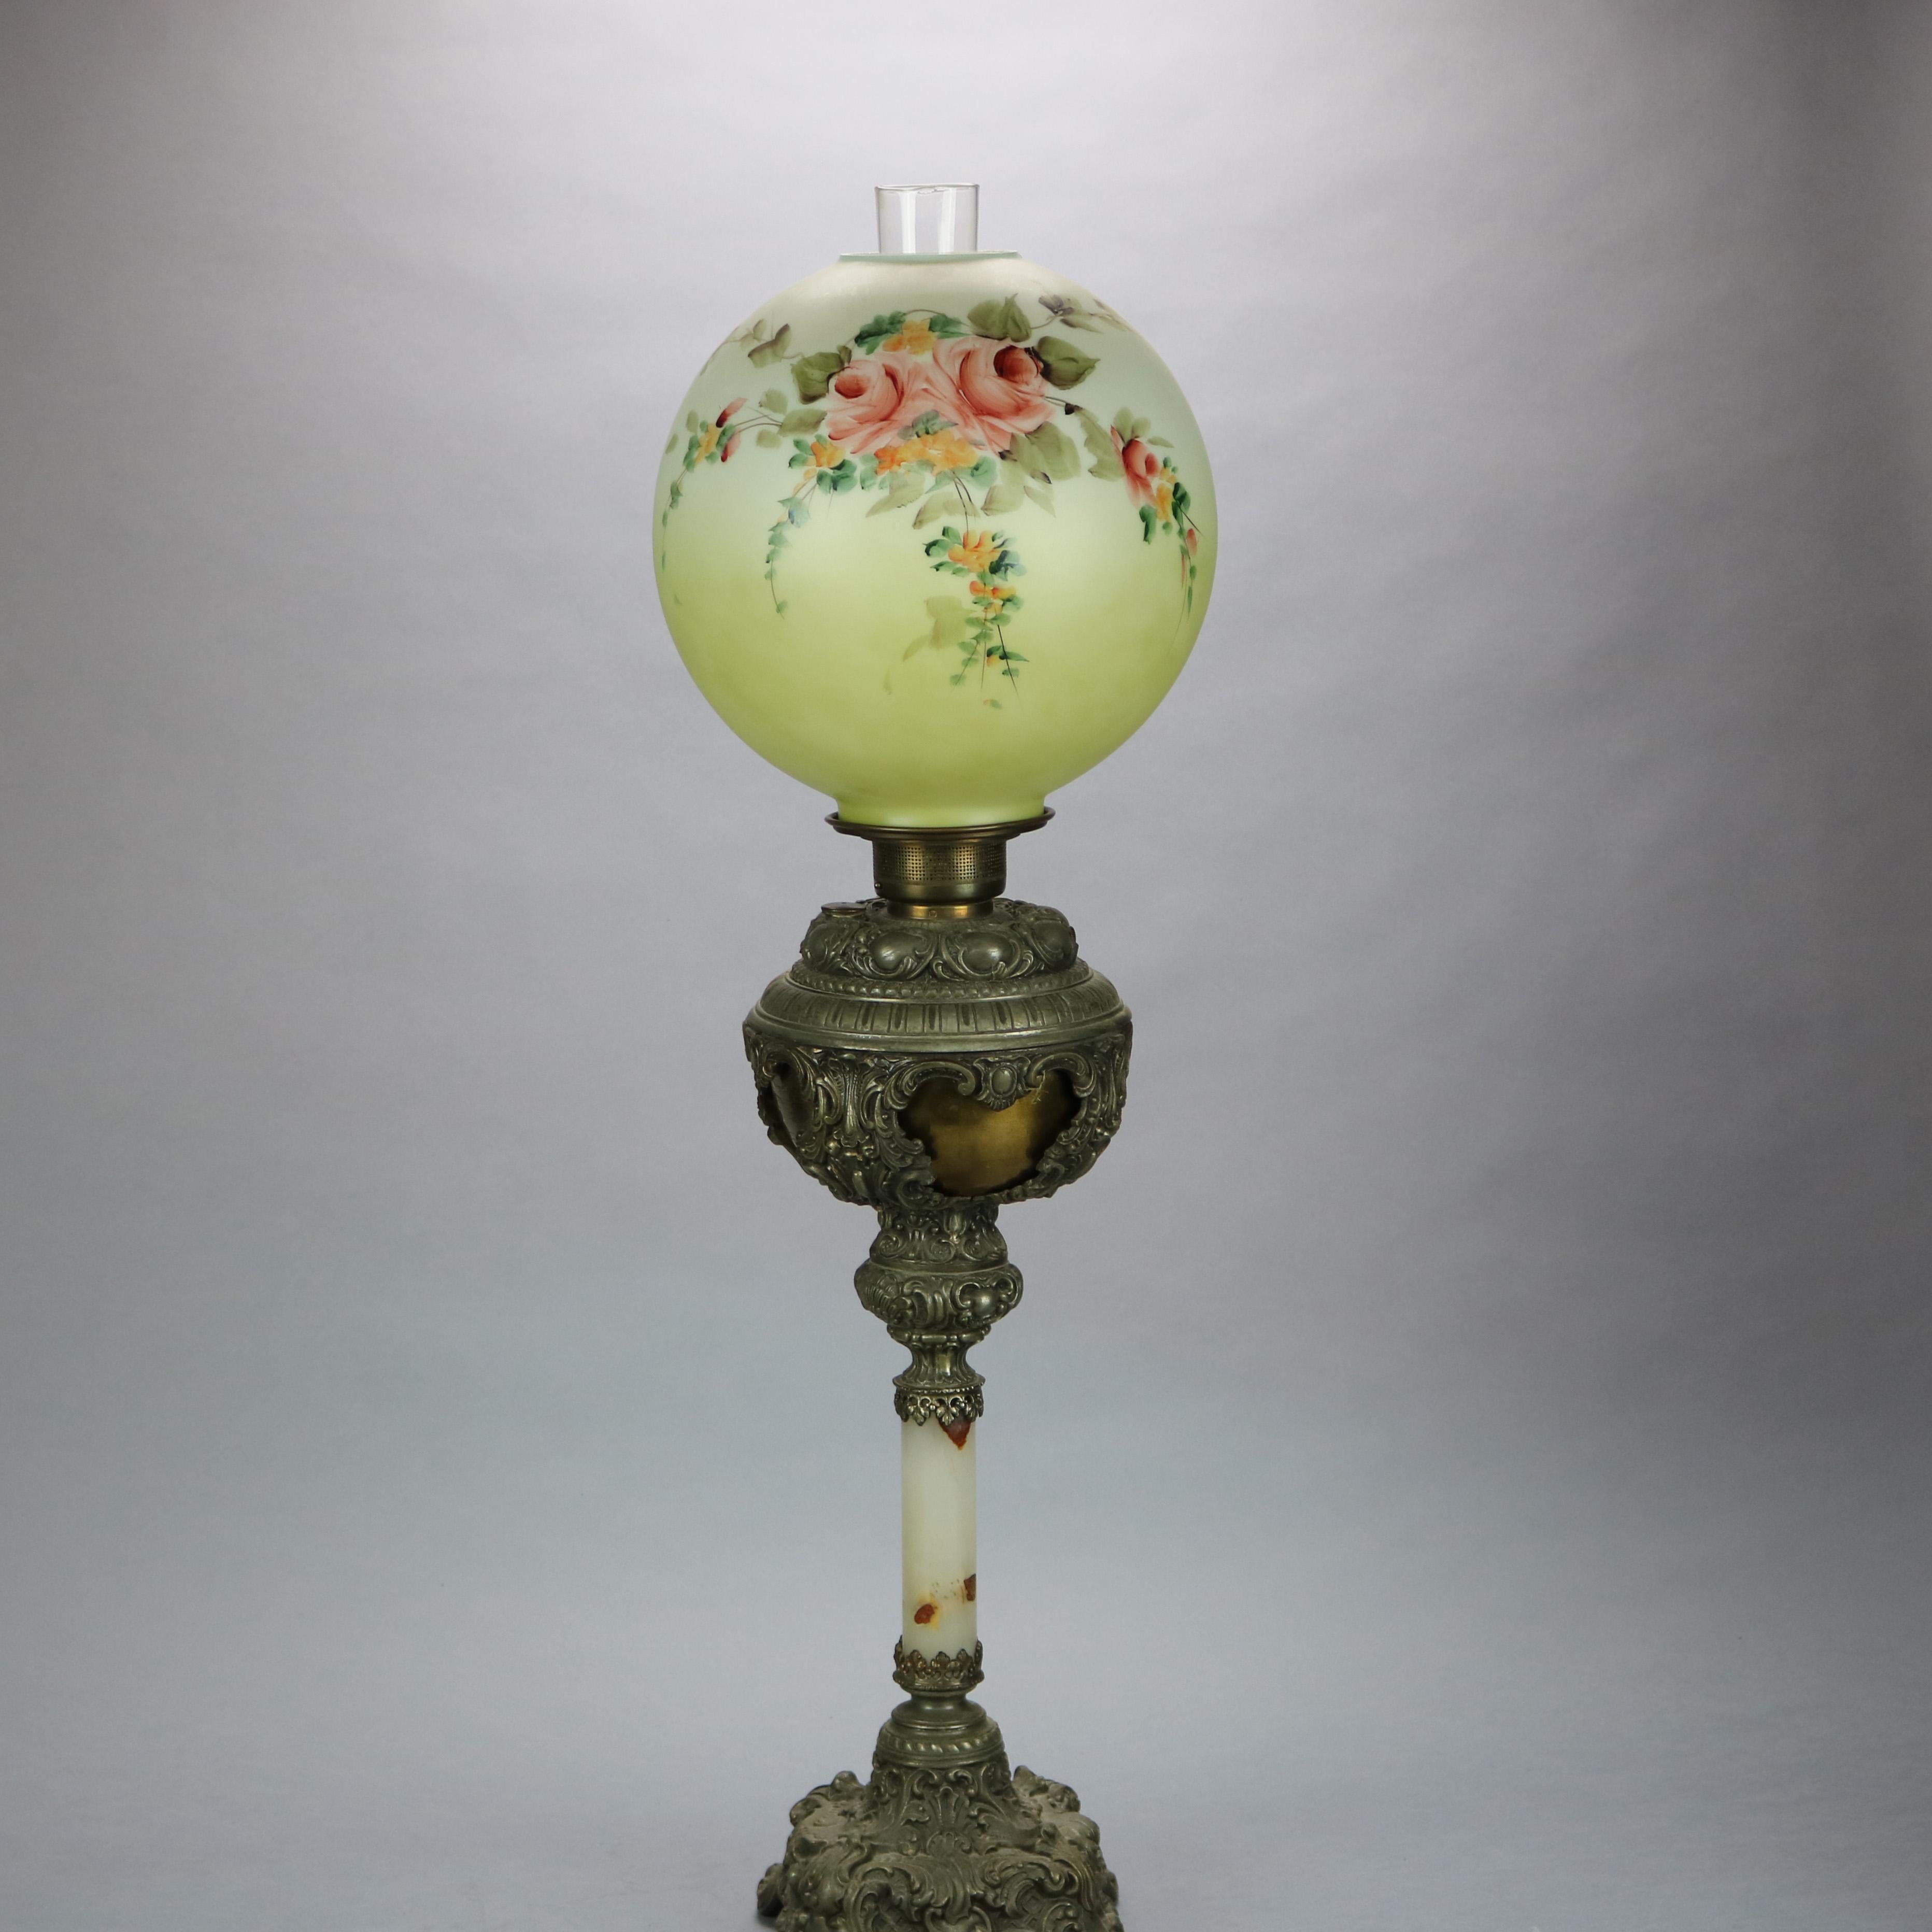 19th Century Antique Victorian Onyx & Gilt Metal Parlor Lamp with Hand Painted Globe, c1890